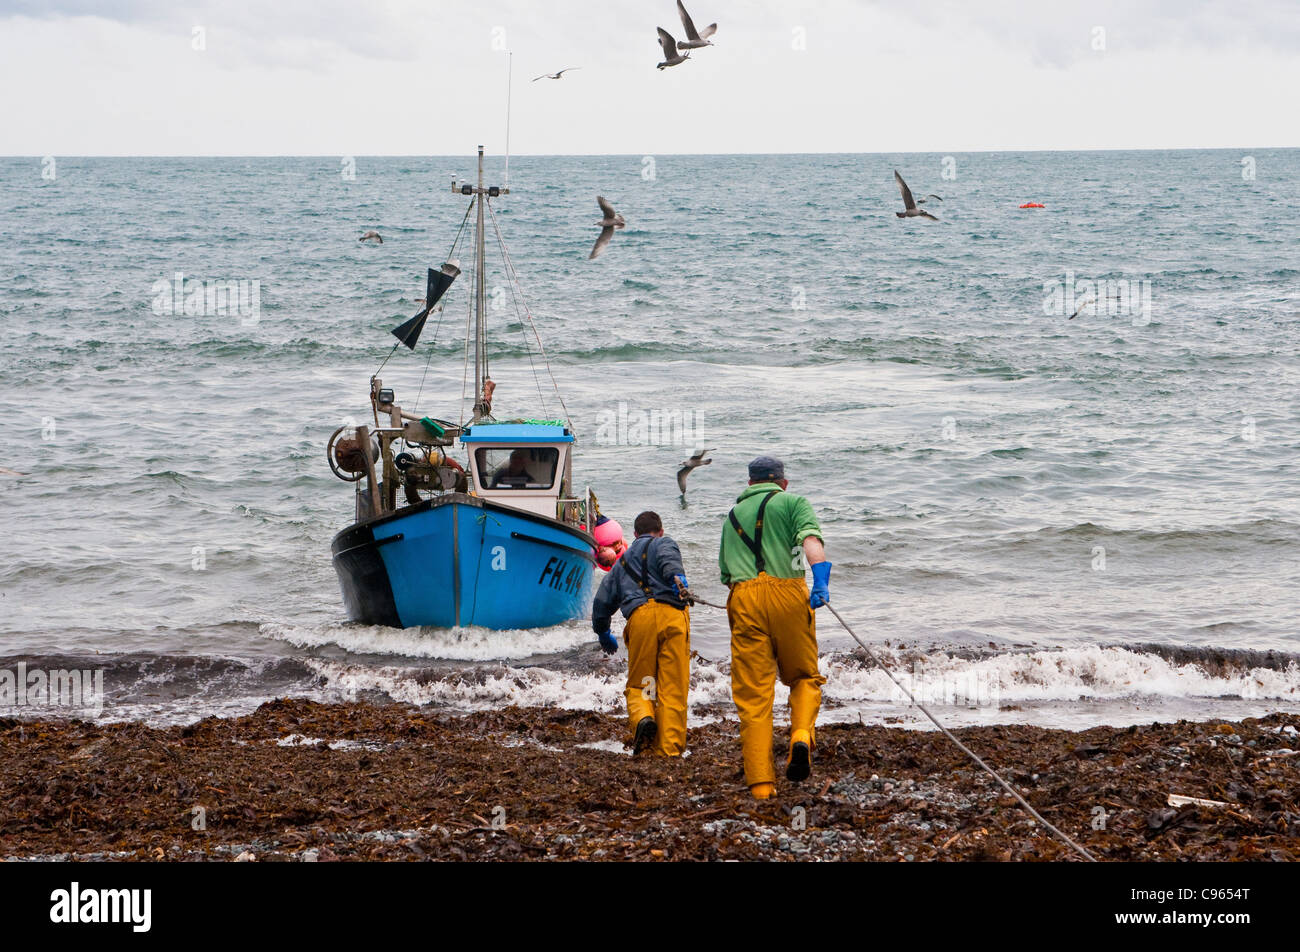 Fishermen in Cadgwith Cornwall helping bring in a crab fishing boat Stock Photo